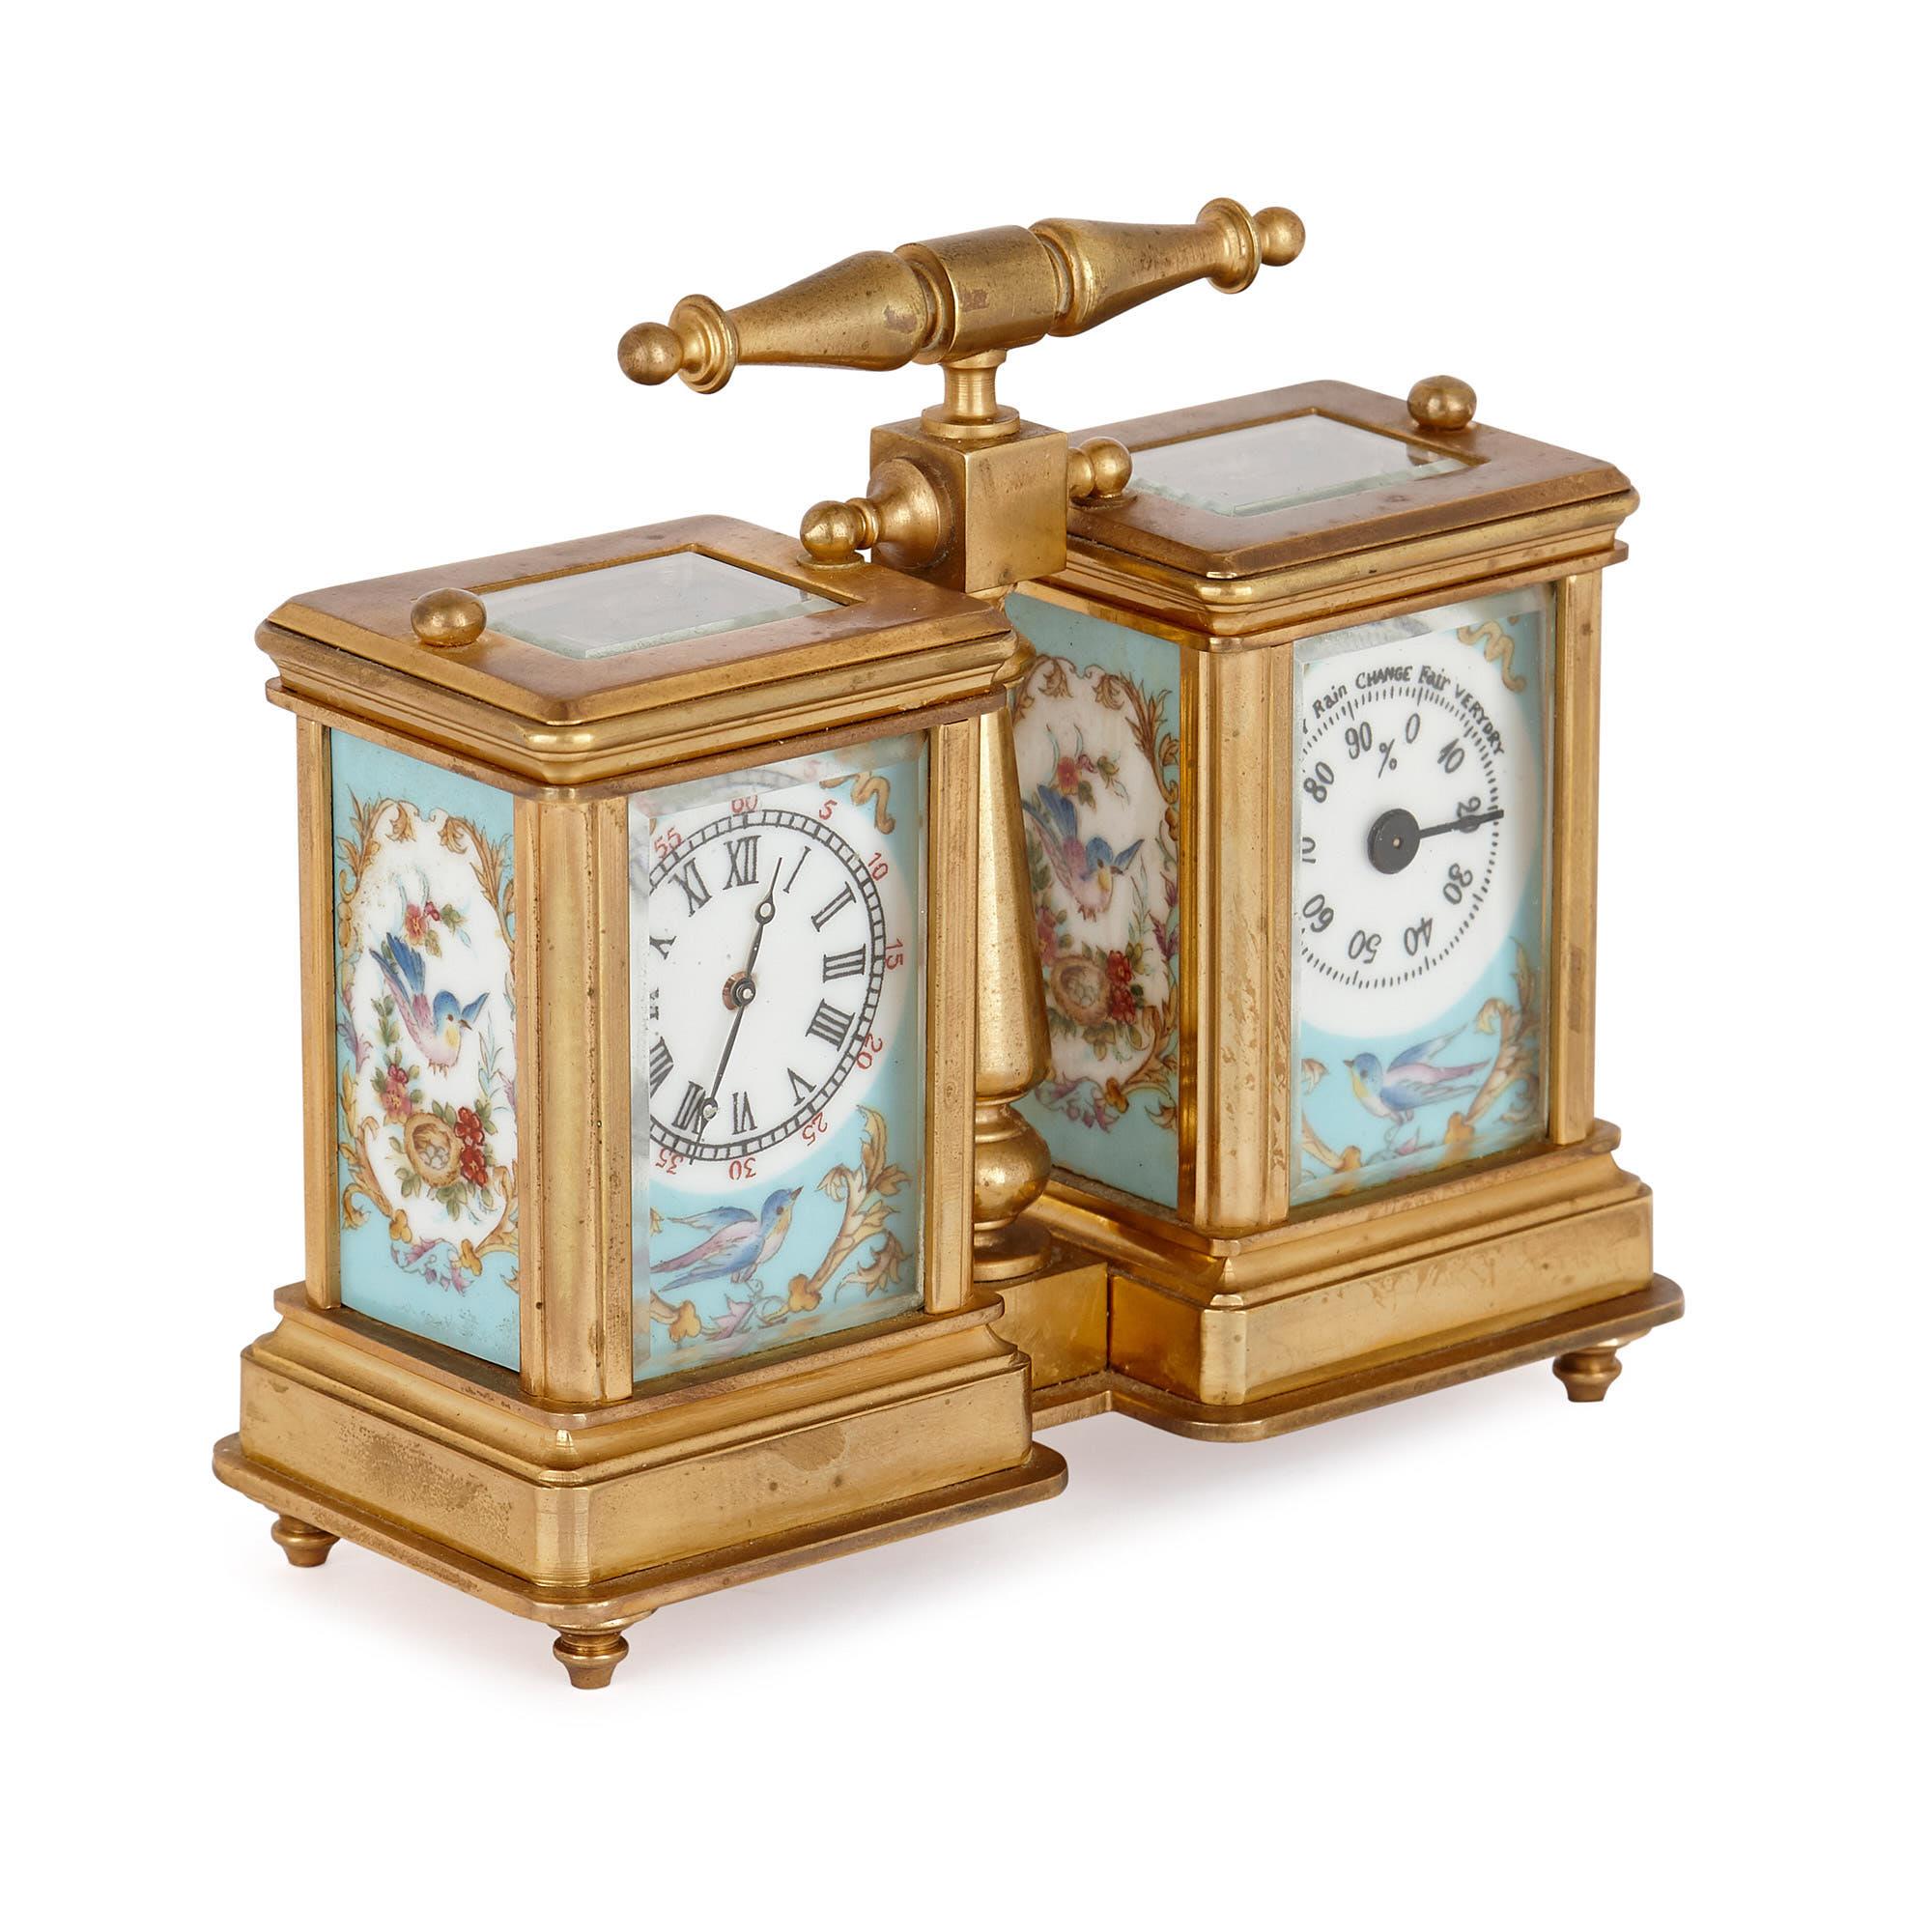 This clock and barometer carriage set is a unique and historic piece of design, which would originally have been used to keep time and monitor the weather while travelling. The pair will look beautiful placed on a mantelpiece, side or dressing